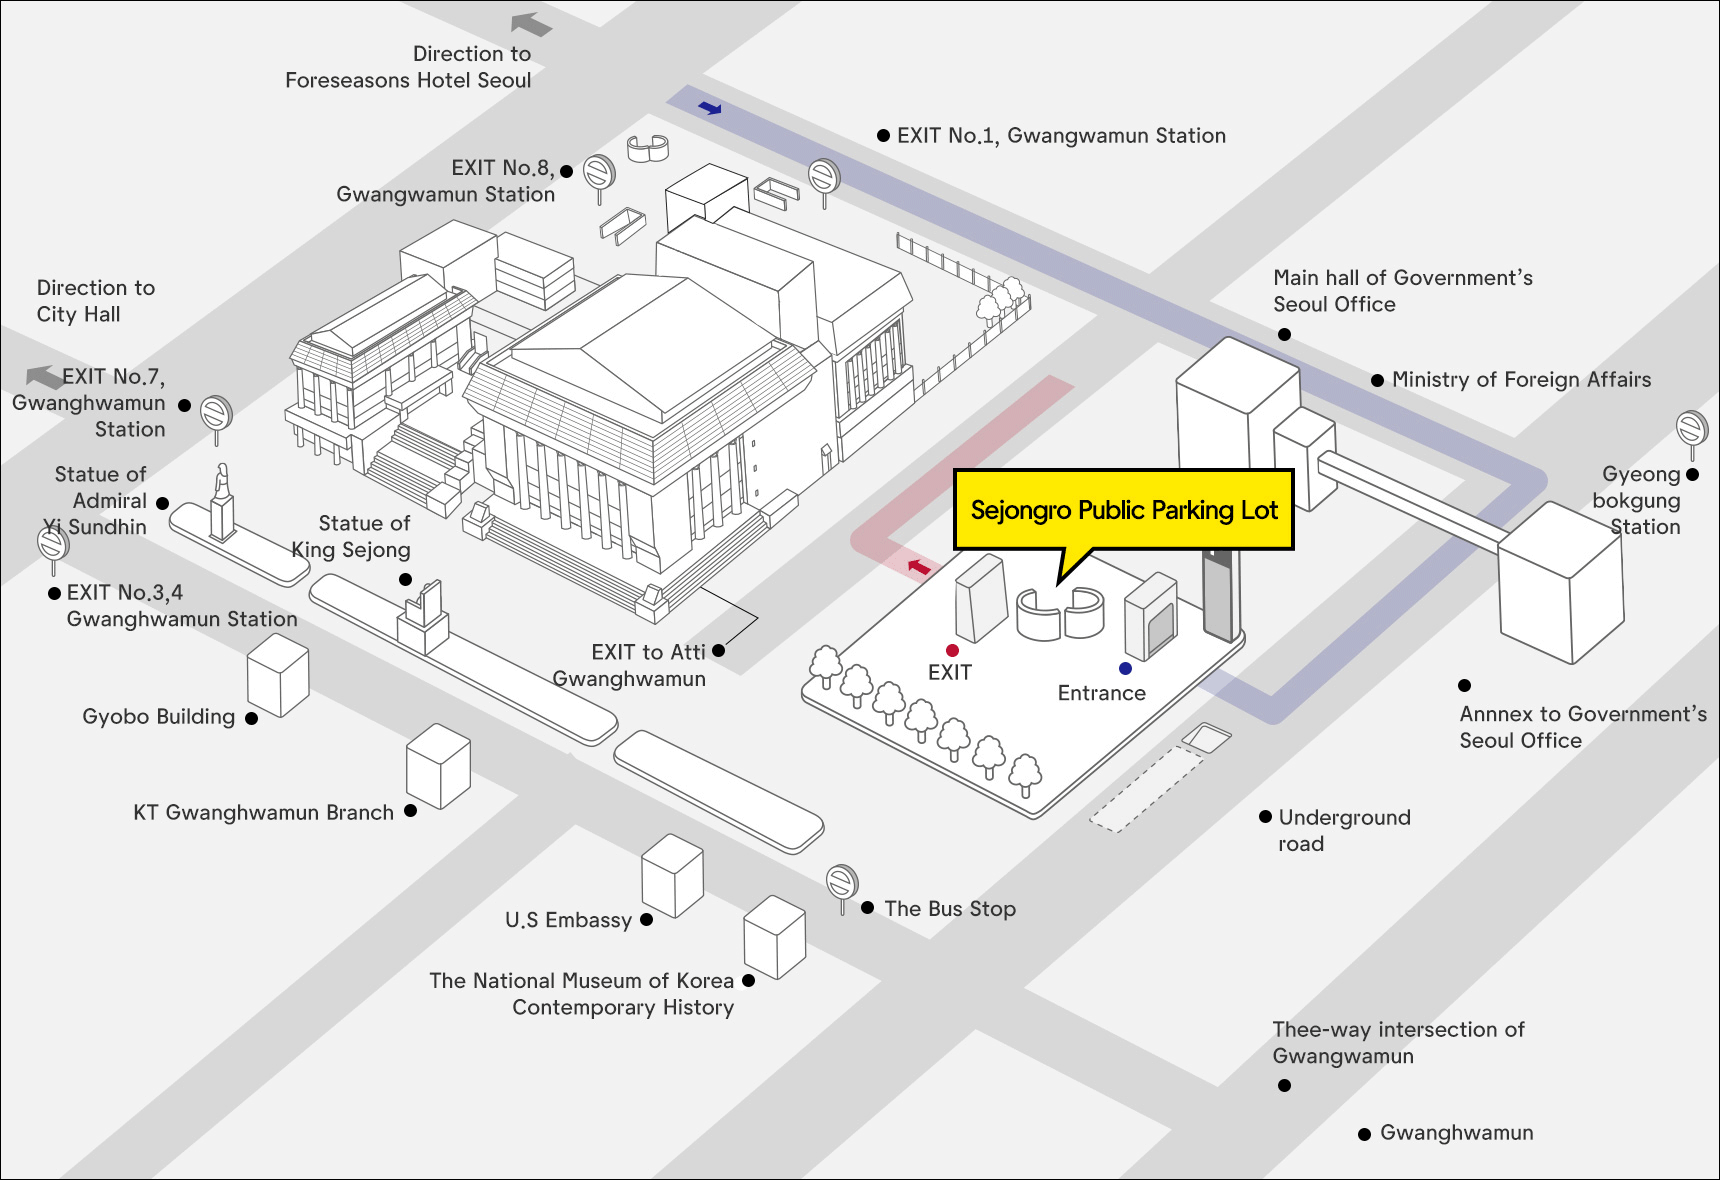 Please refer to the parking lot entrance map below for details.